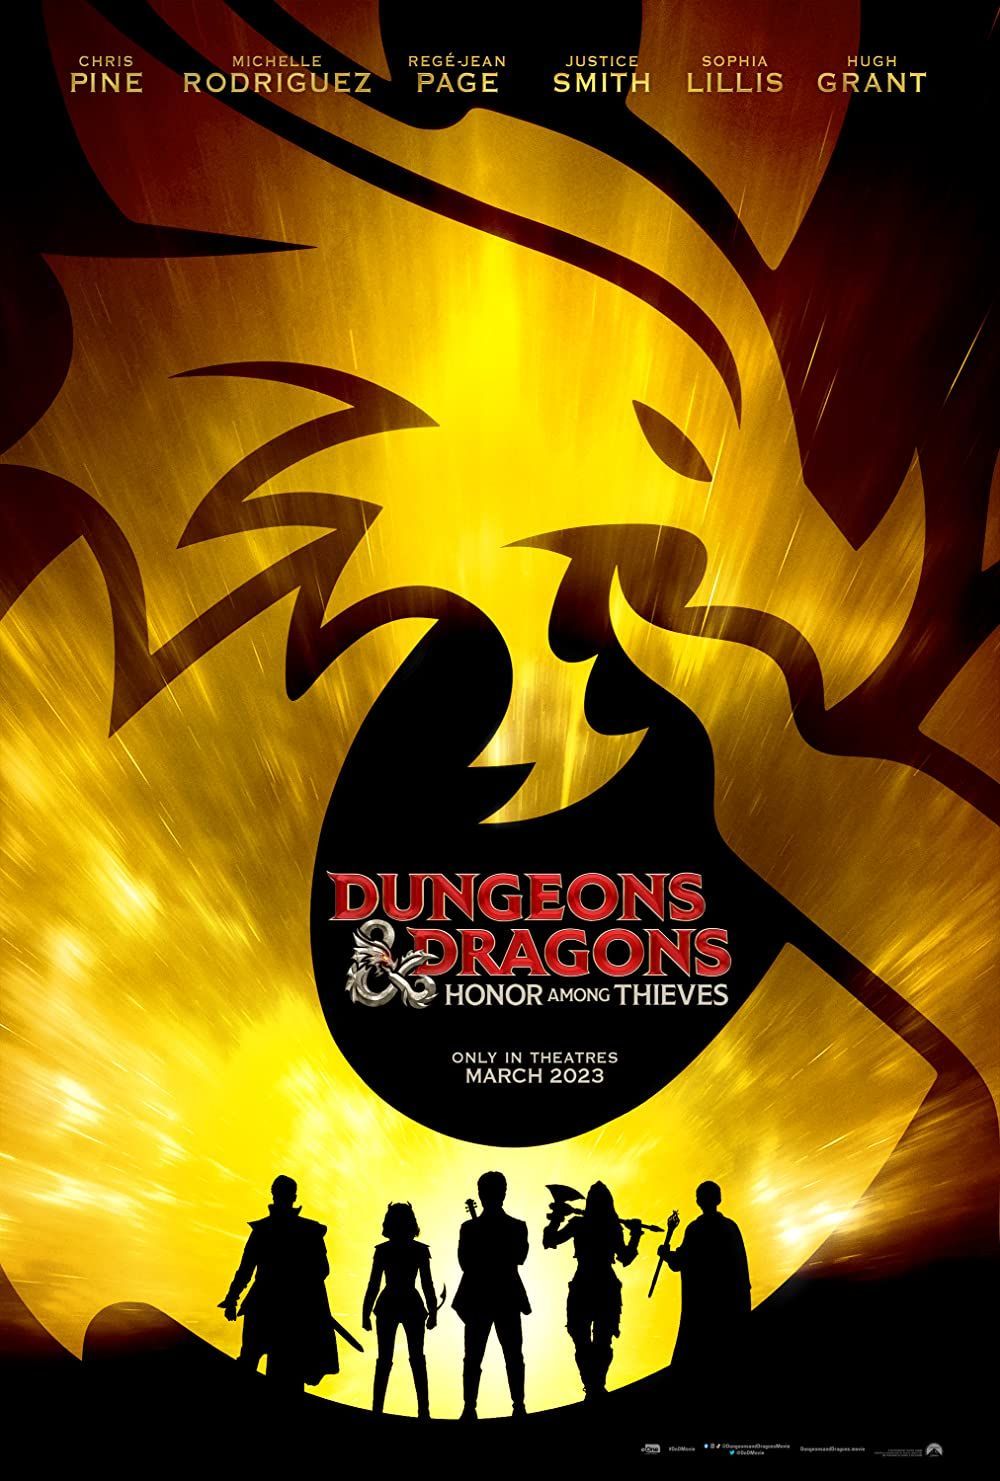 Who Owns Dungeons & Dragons?